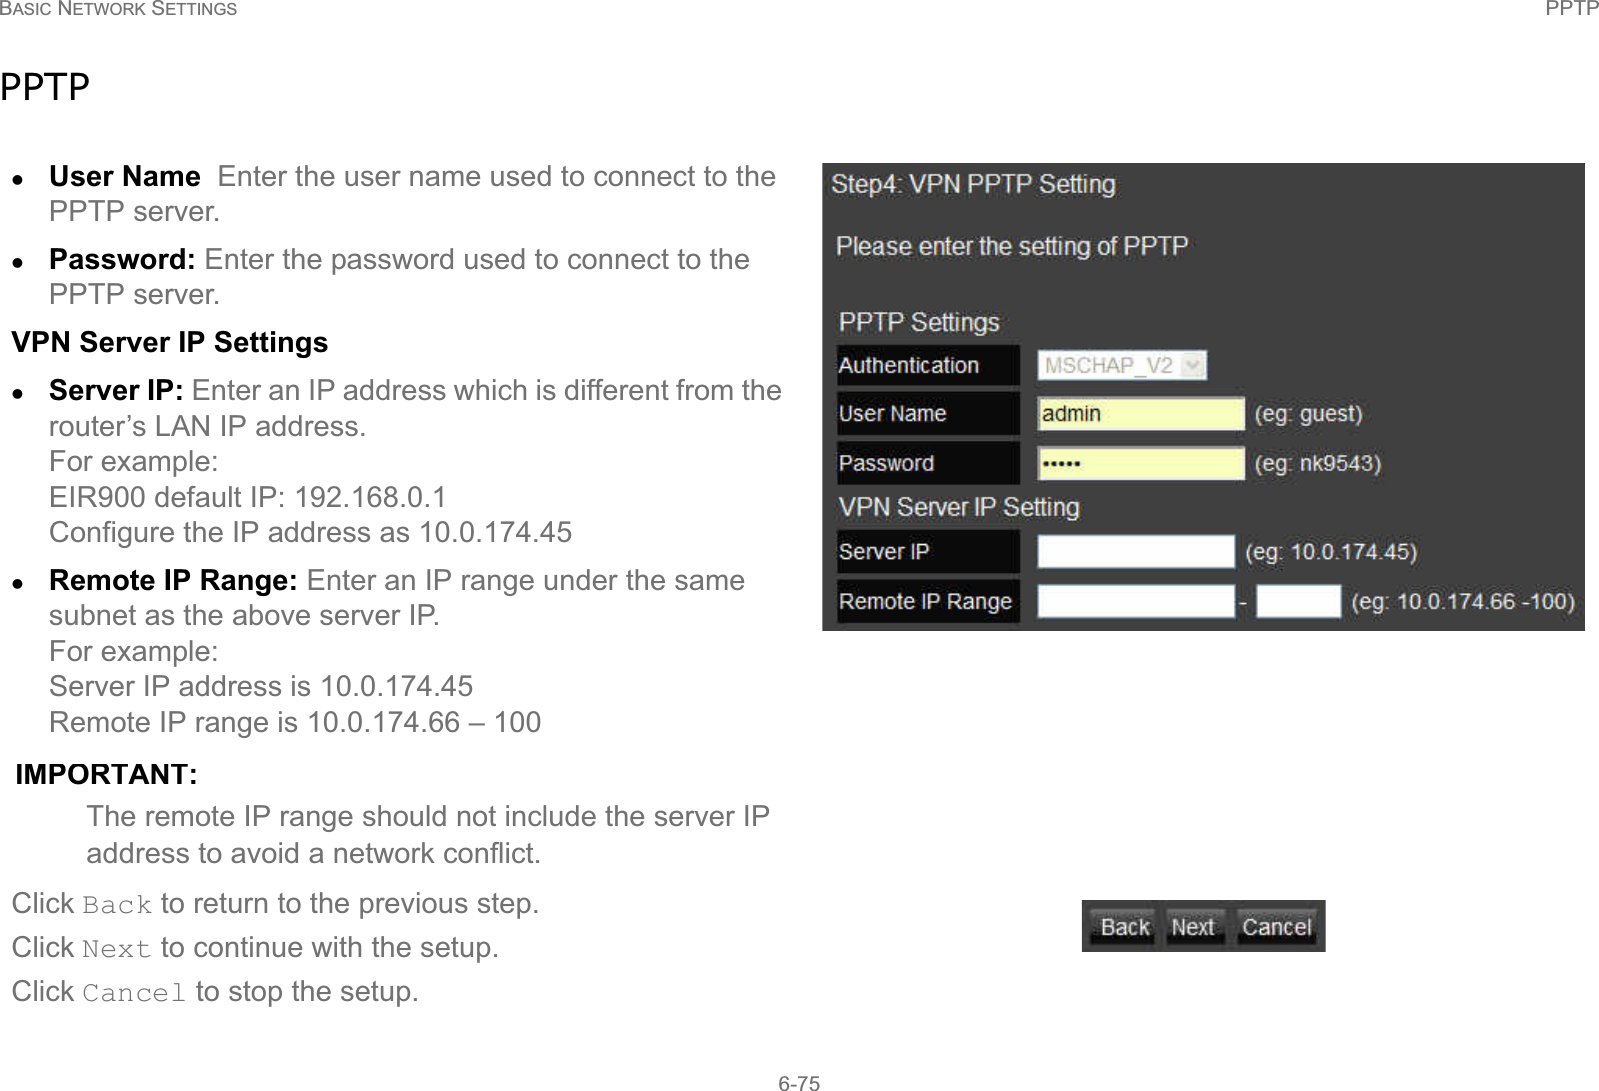 BASIC NETWORK SETTINGS PPTP6-75PPTPzUser Name  Enter the user name used to connect to the PPTP server.zPassword: Enter the password used to connect to the PPTP server.VPN Server IP SettingszServer IP: Enter an IP address which is different from the router’s LAN IP address.For example:EIR900 default IP: 192.168.0.1 Configure the IP address as 10.0.174.45zRemote IP Range: Enter an IP range under the same subnet as the above server IP. For example: Server IP address is 10.0.174.45Remote IP range is 10.0.174.66 – 100IMPORTANT:The remote IP range should not include the server IP address to avoid a network conflict.Click Back to return to the previous step.Click Next to continue with the setup.Click Cancel to stop the setup.